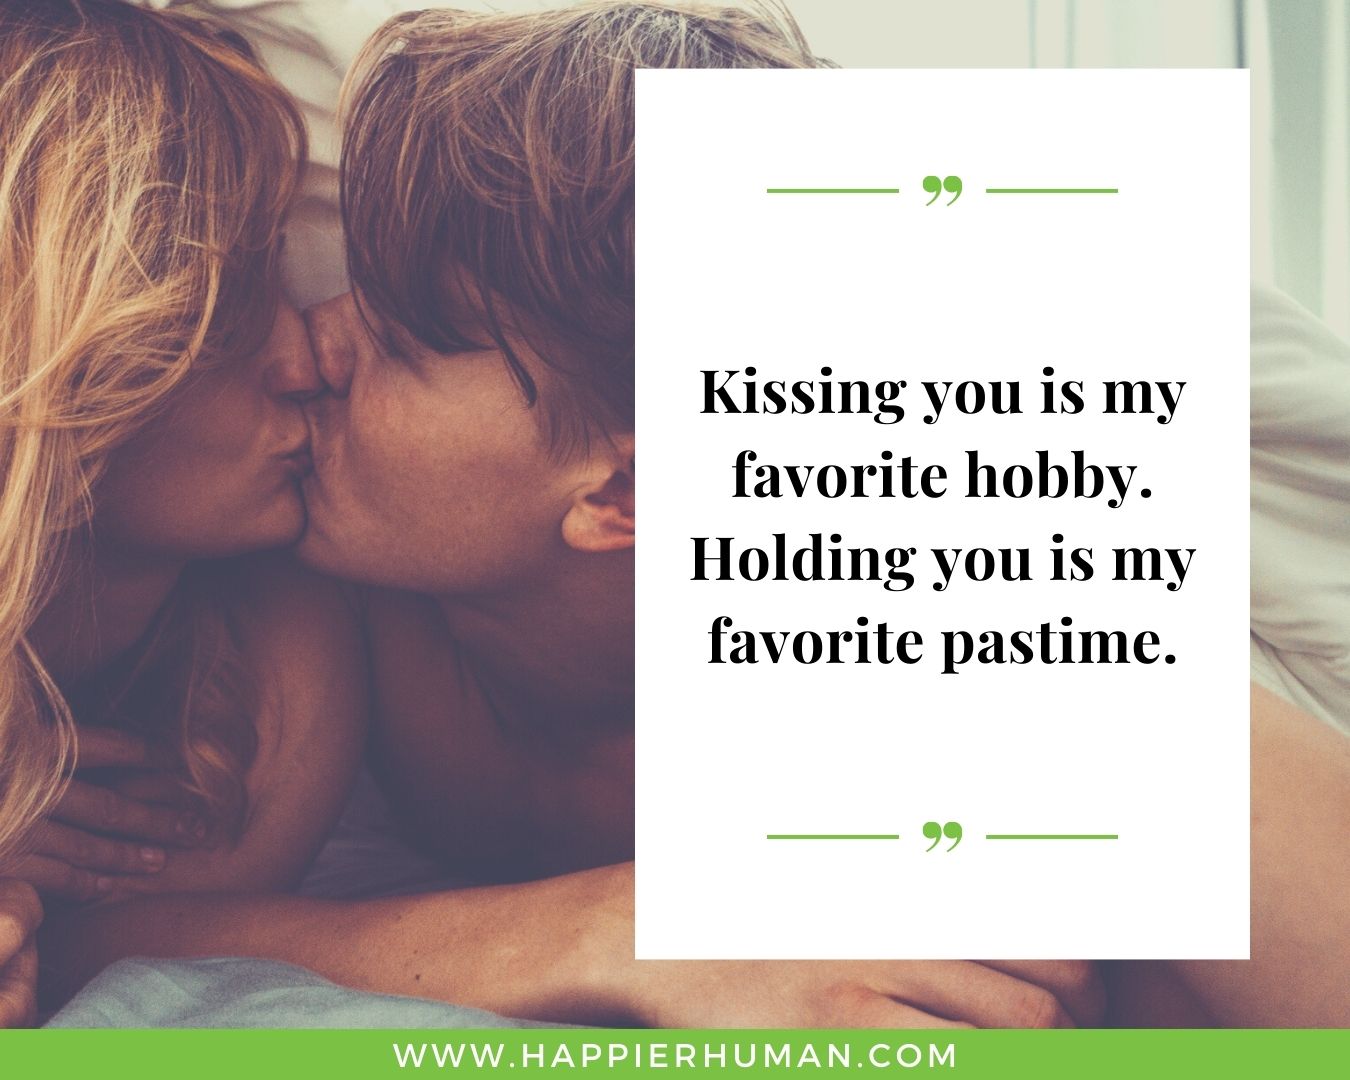 Loving Romantic Quotes for Her - “Kissing you is my favorite hobby. Holding you is my favorite pastime.”